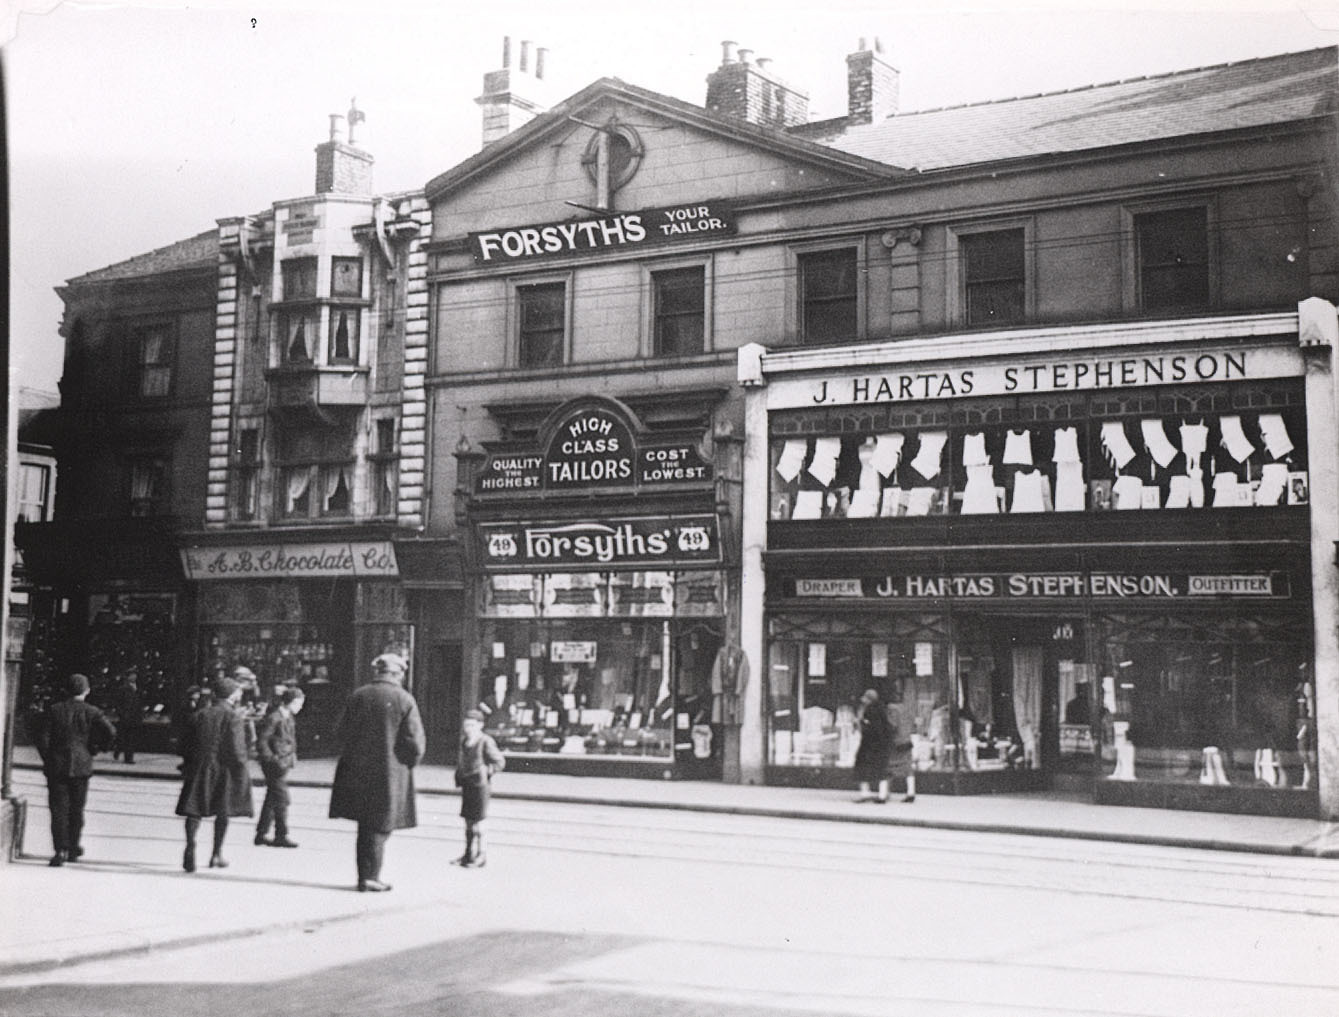 Edward Peases house in the 1940s - the grand facade was added in the 1860s and retail started creeping in at the start of 20th Century